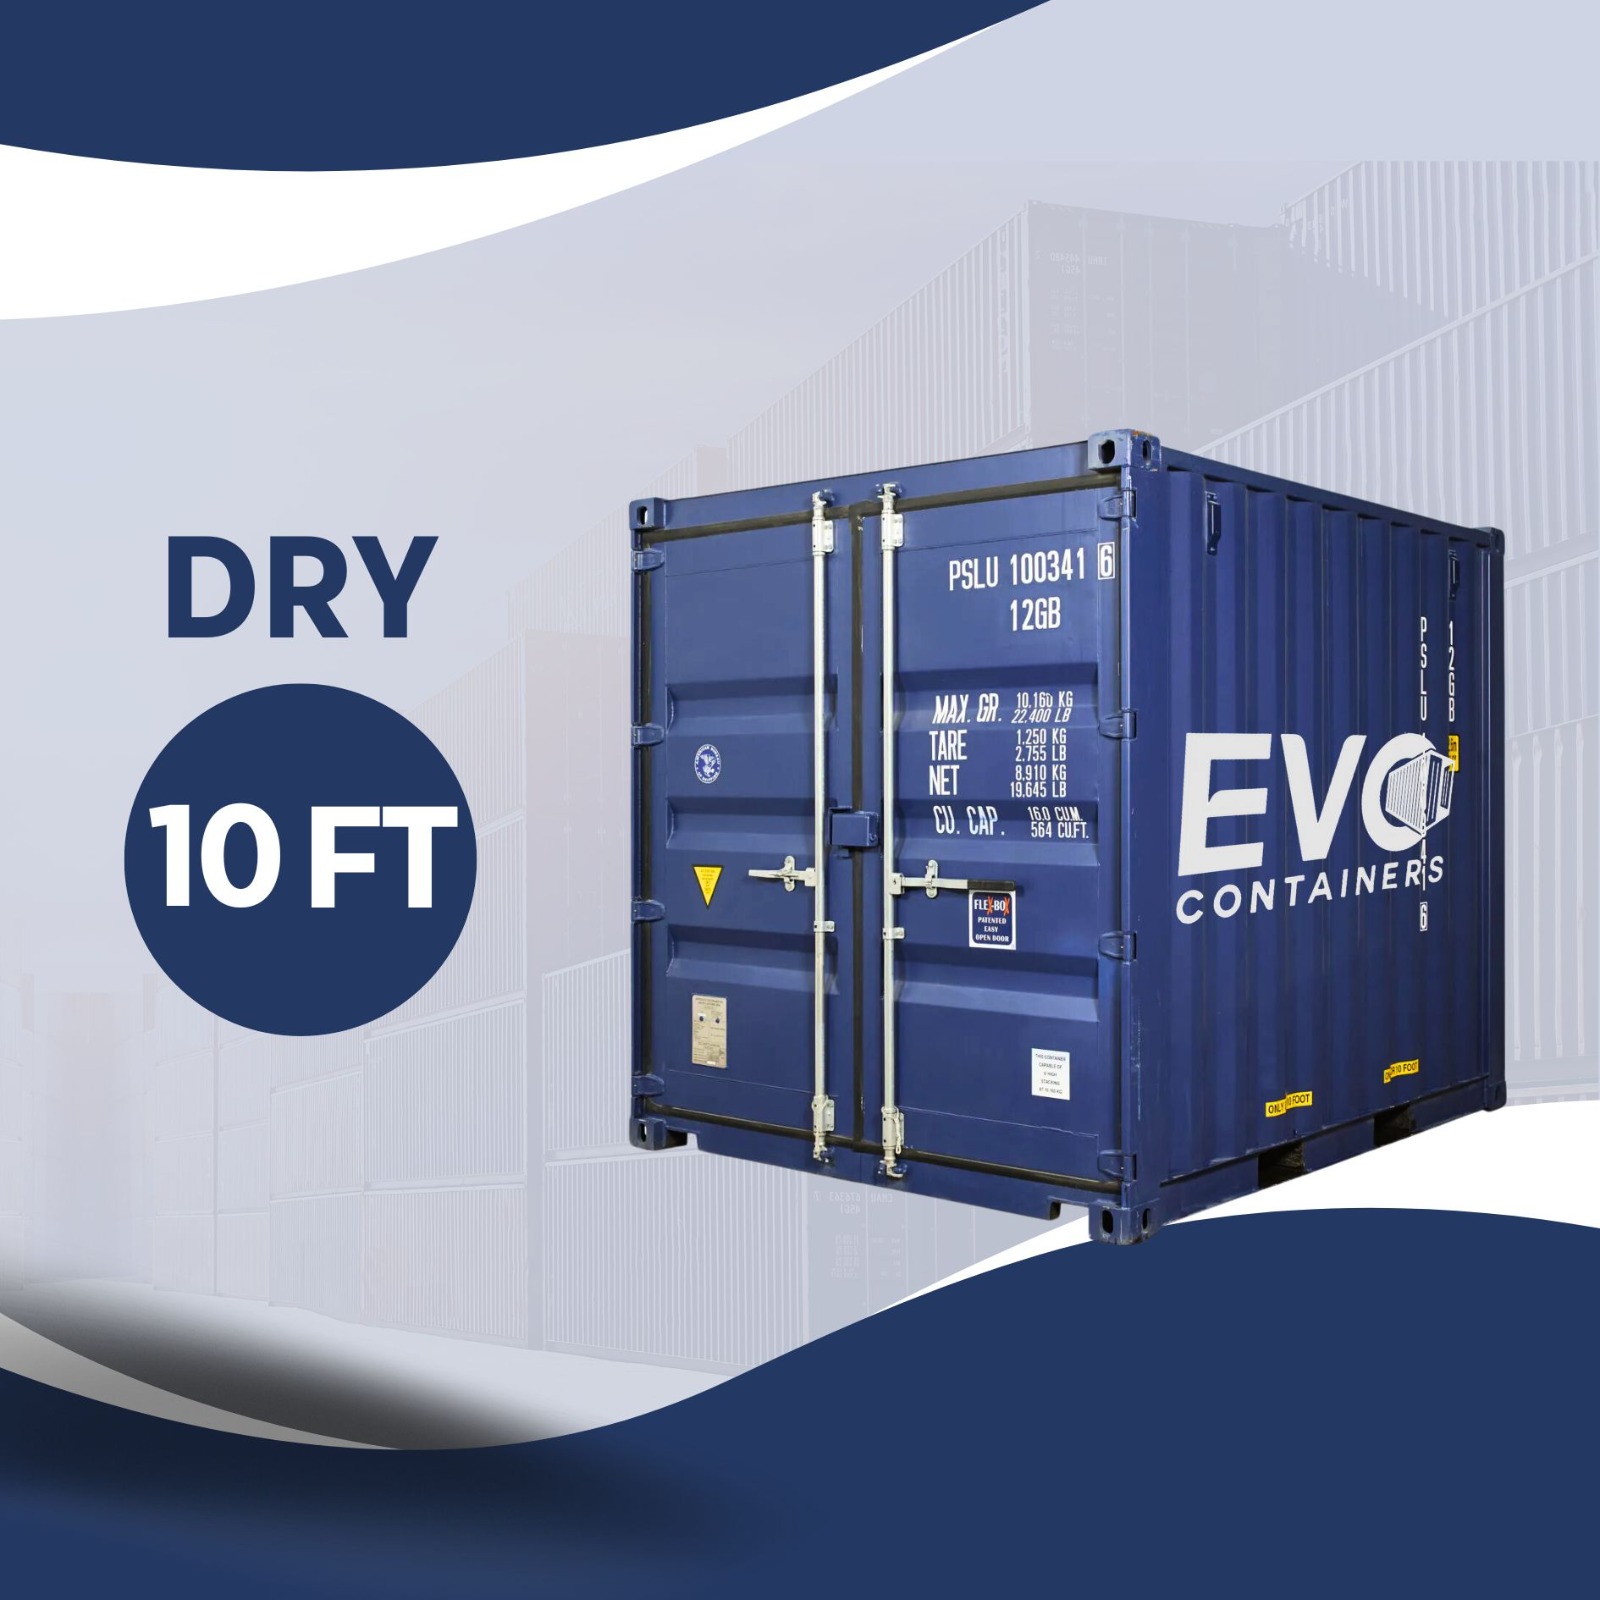 CONTAINER DRY 10' ft